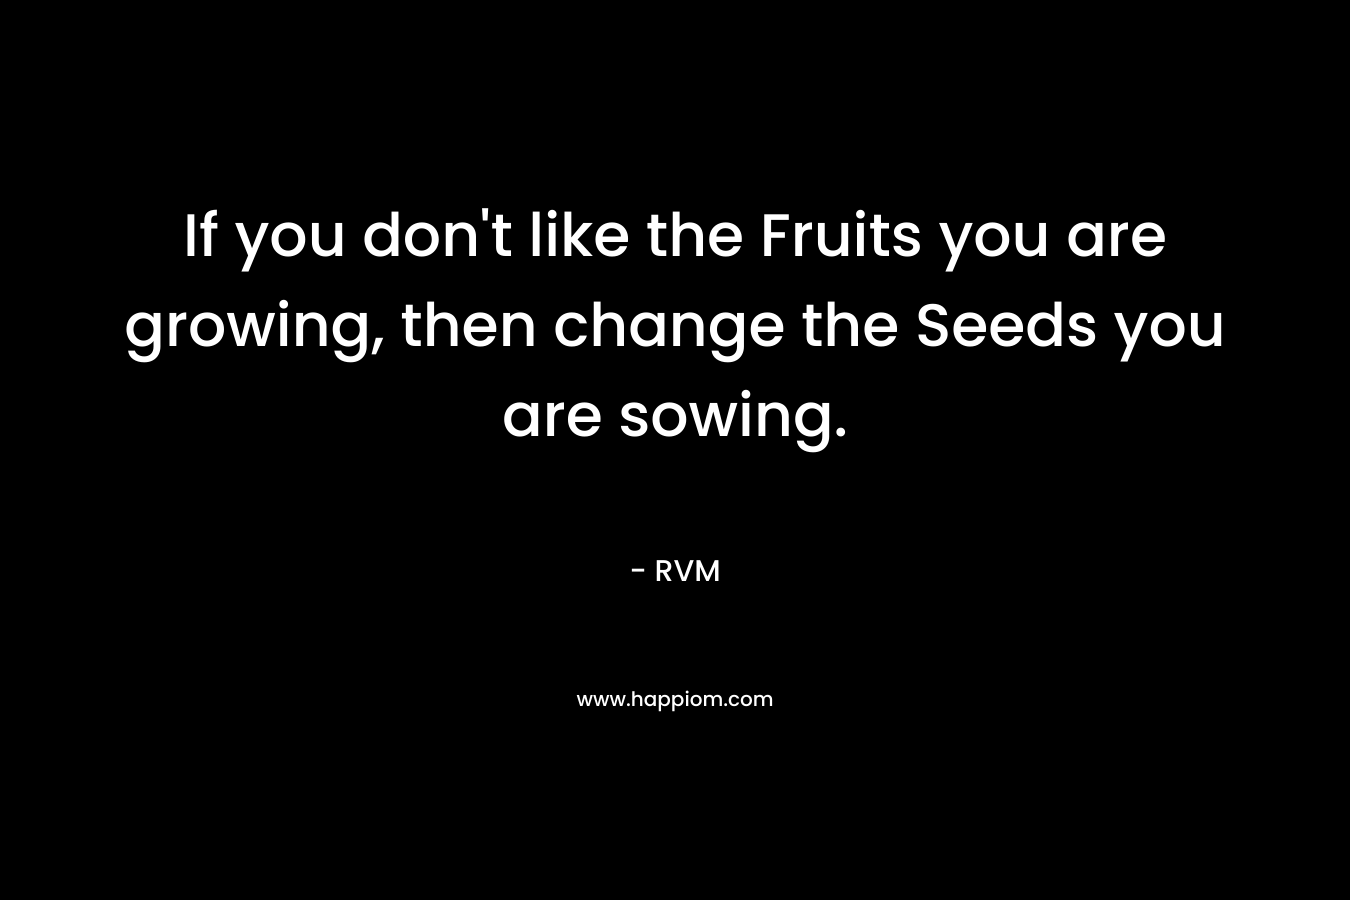 If you don’t like the Fruits you are growing, then change the Seeds you are sowing. – RVM